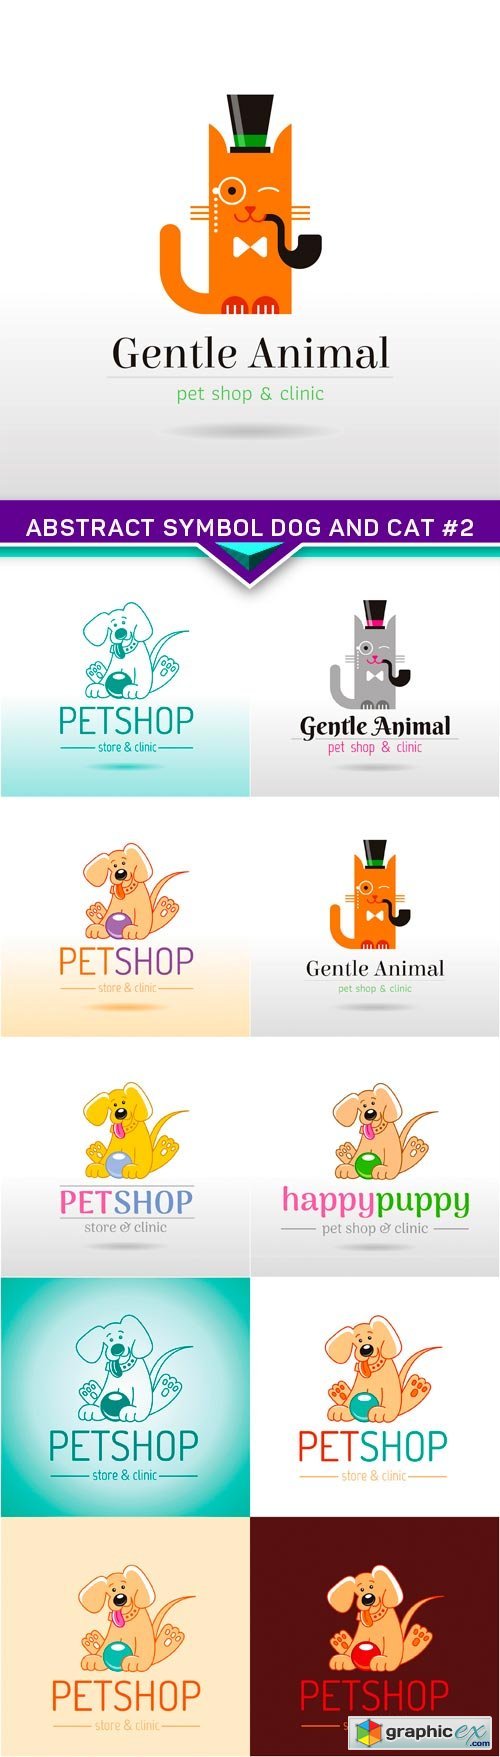 Abstract symbol dog and cat for pet shop, veterinary #2 7X EPS